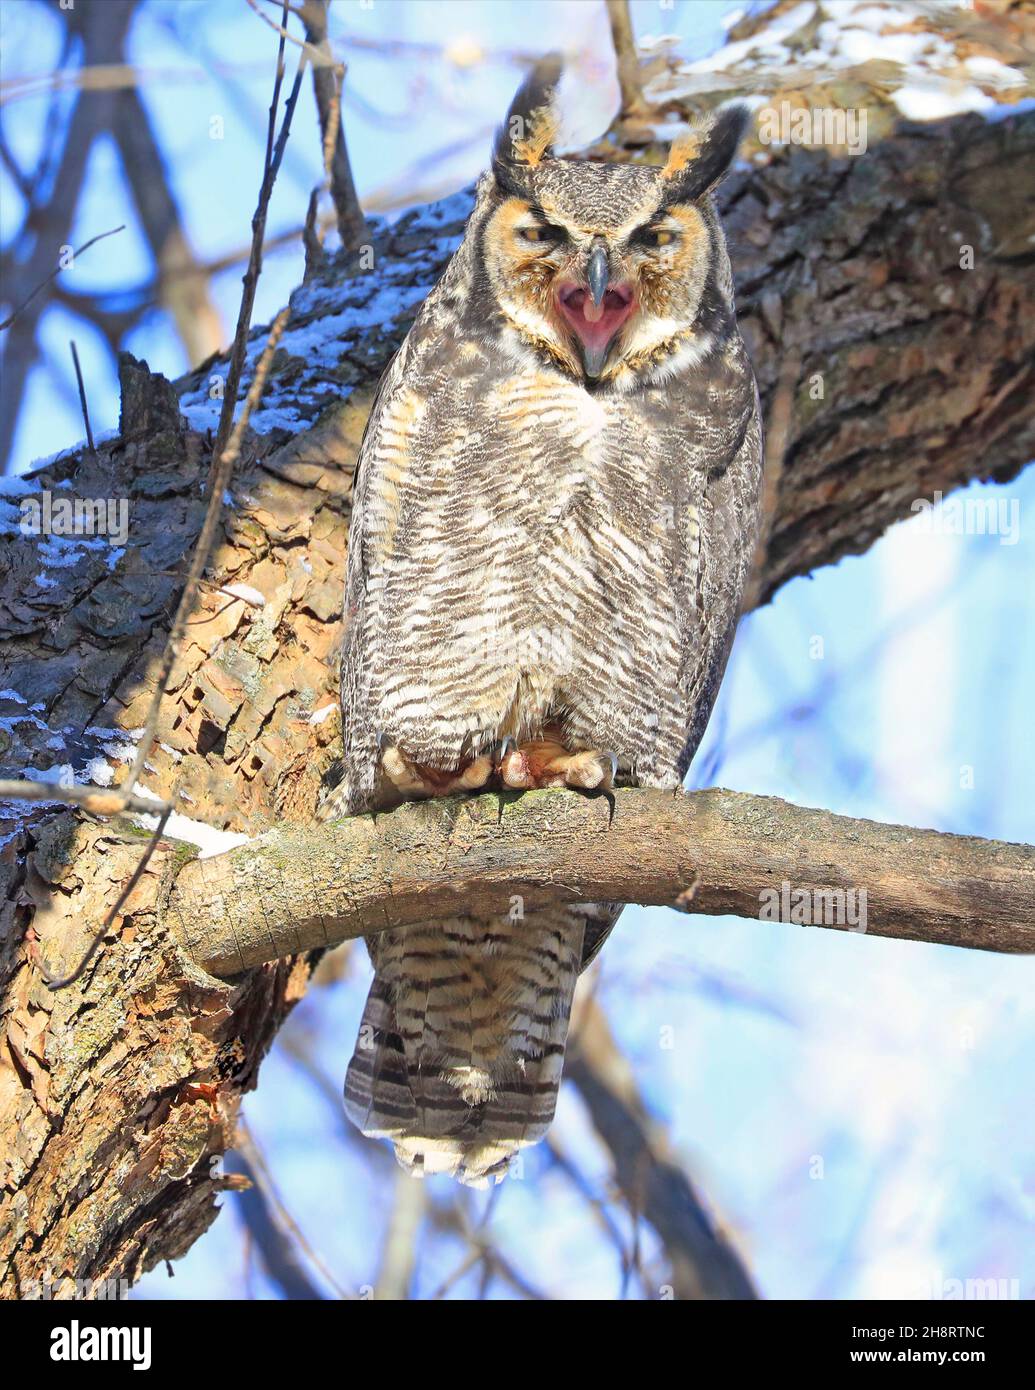 Great horned owl standing on a tree branch, Quebec, Canada Stock Photo